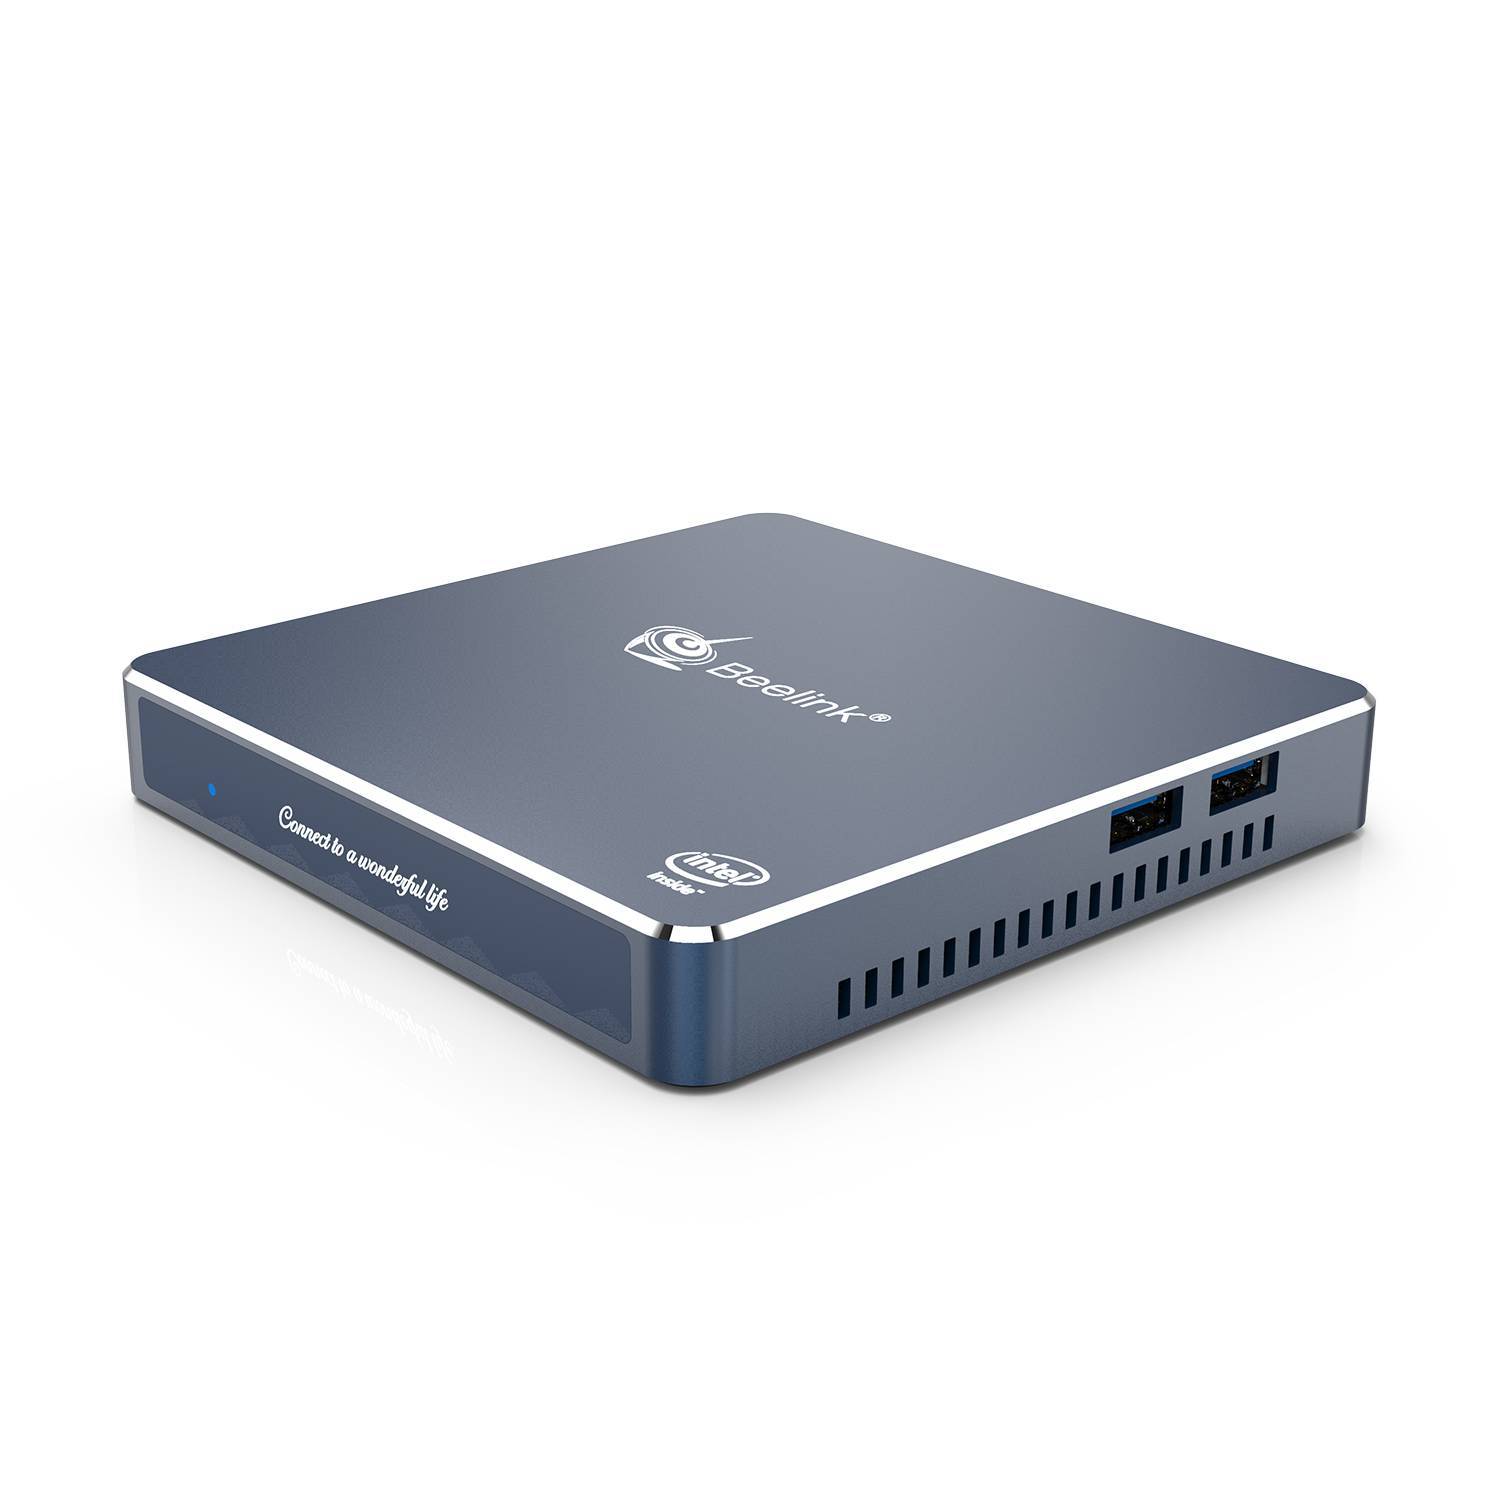 Beelink Gemini M Intel Mini PC Computer - Shown from angle with front plate and 2x USB Ports